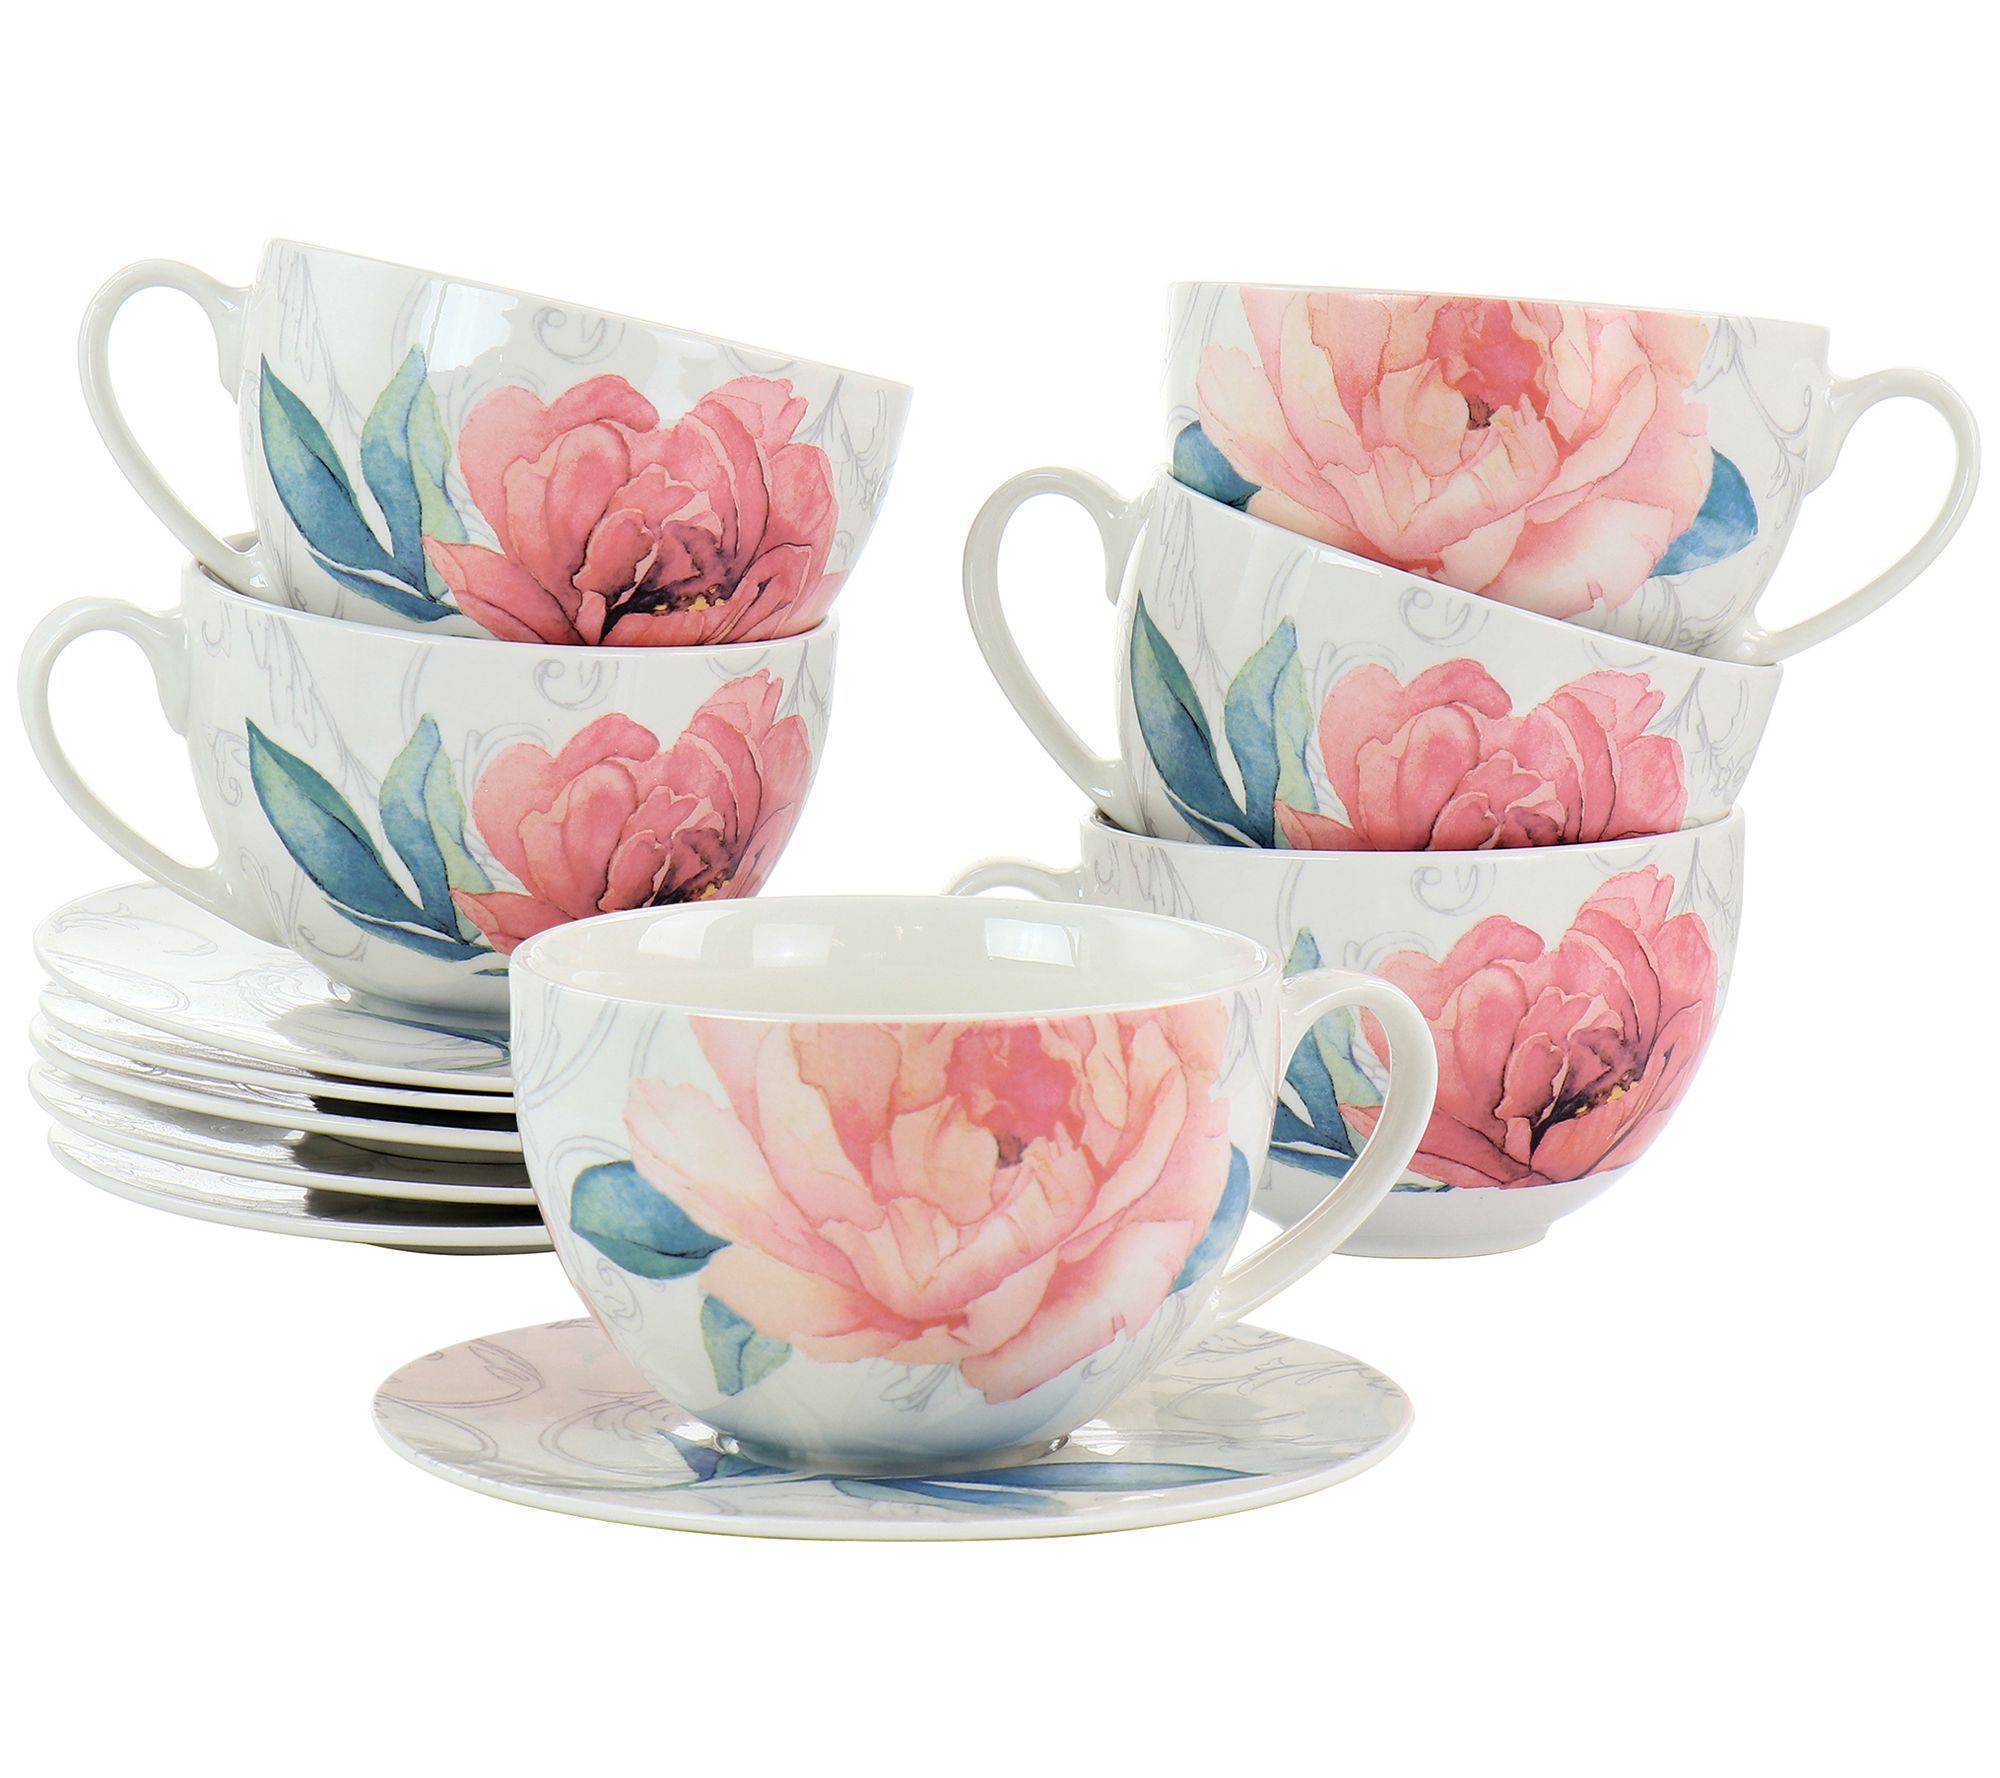 Philosophy Home Porcelain Coffee Cup and Saucer Set - My Star